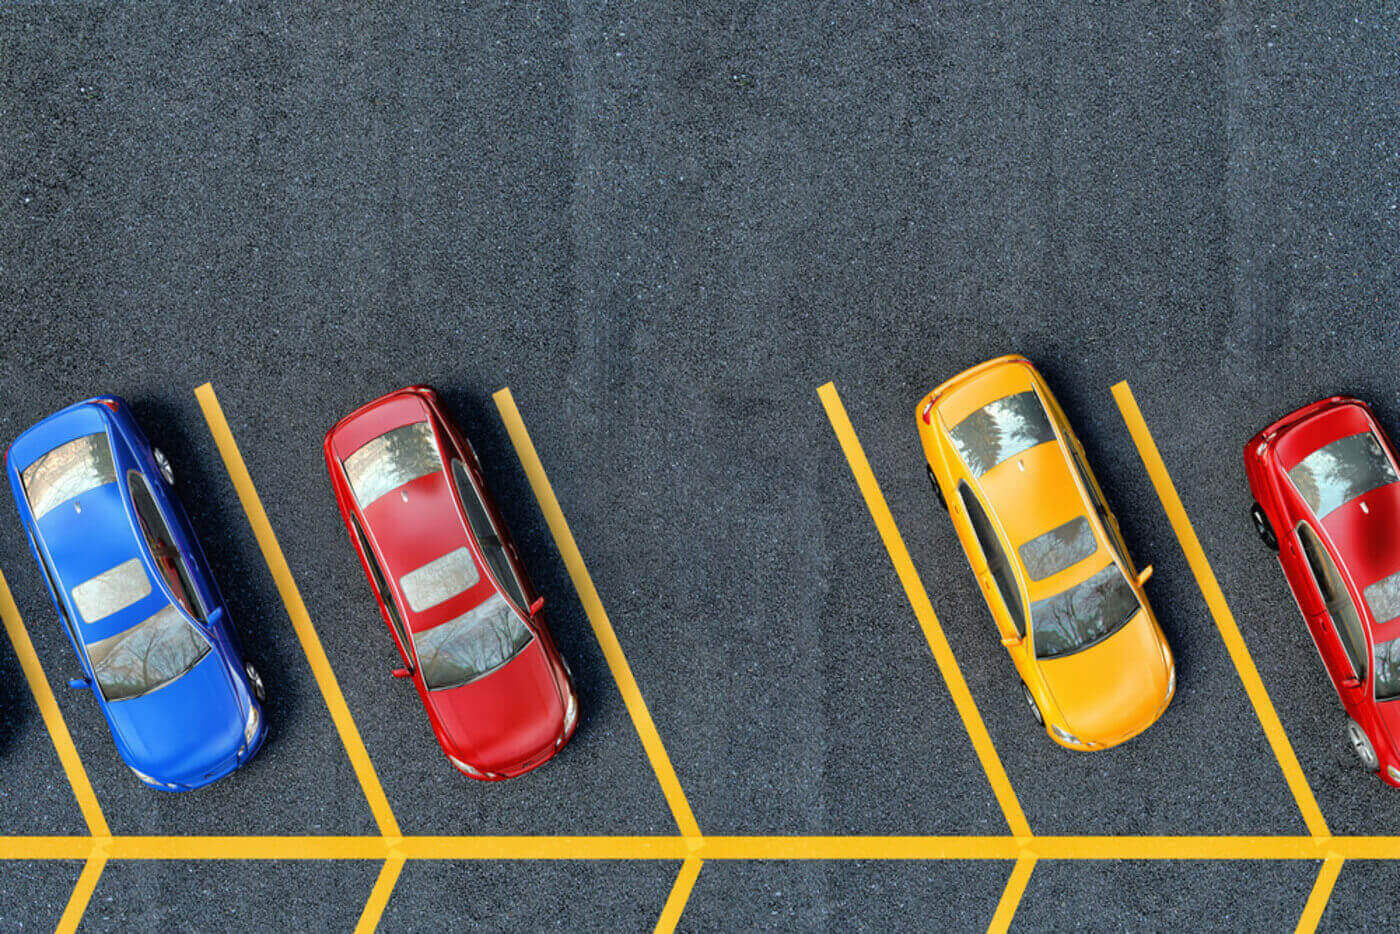 Top view of 2 red, blue and yellow cars parked